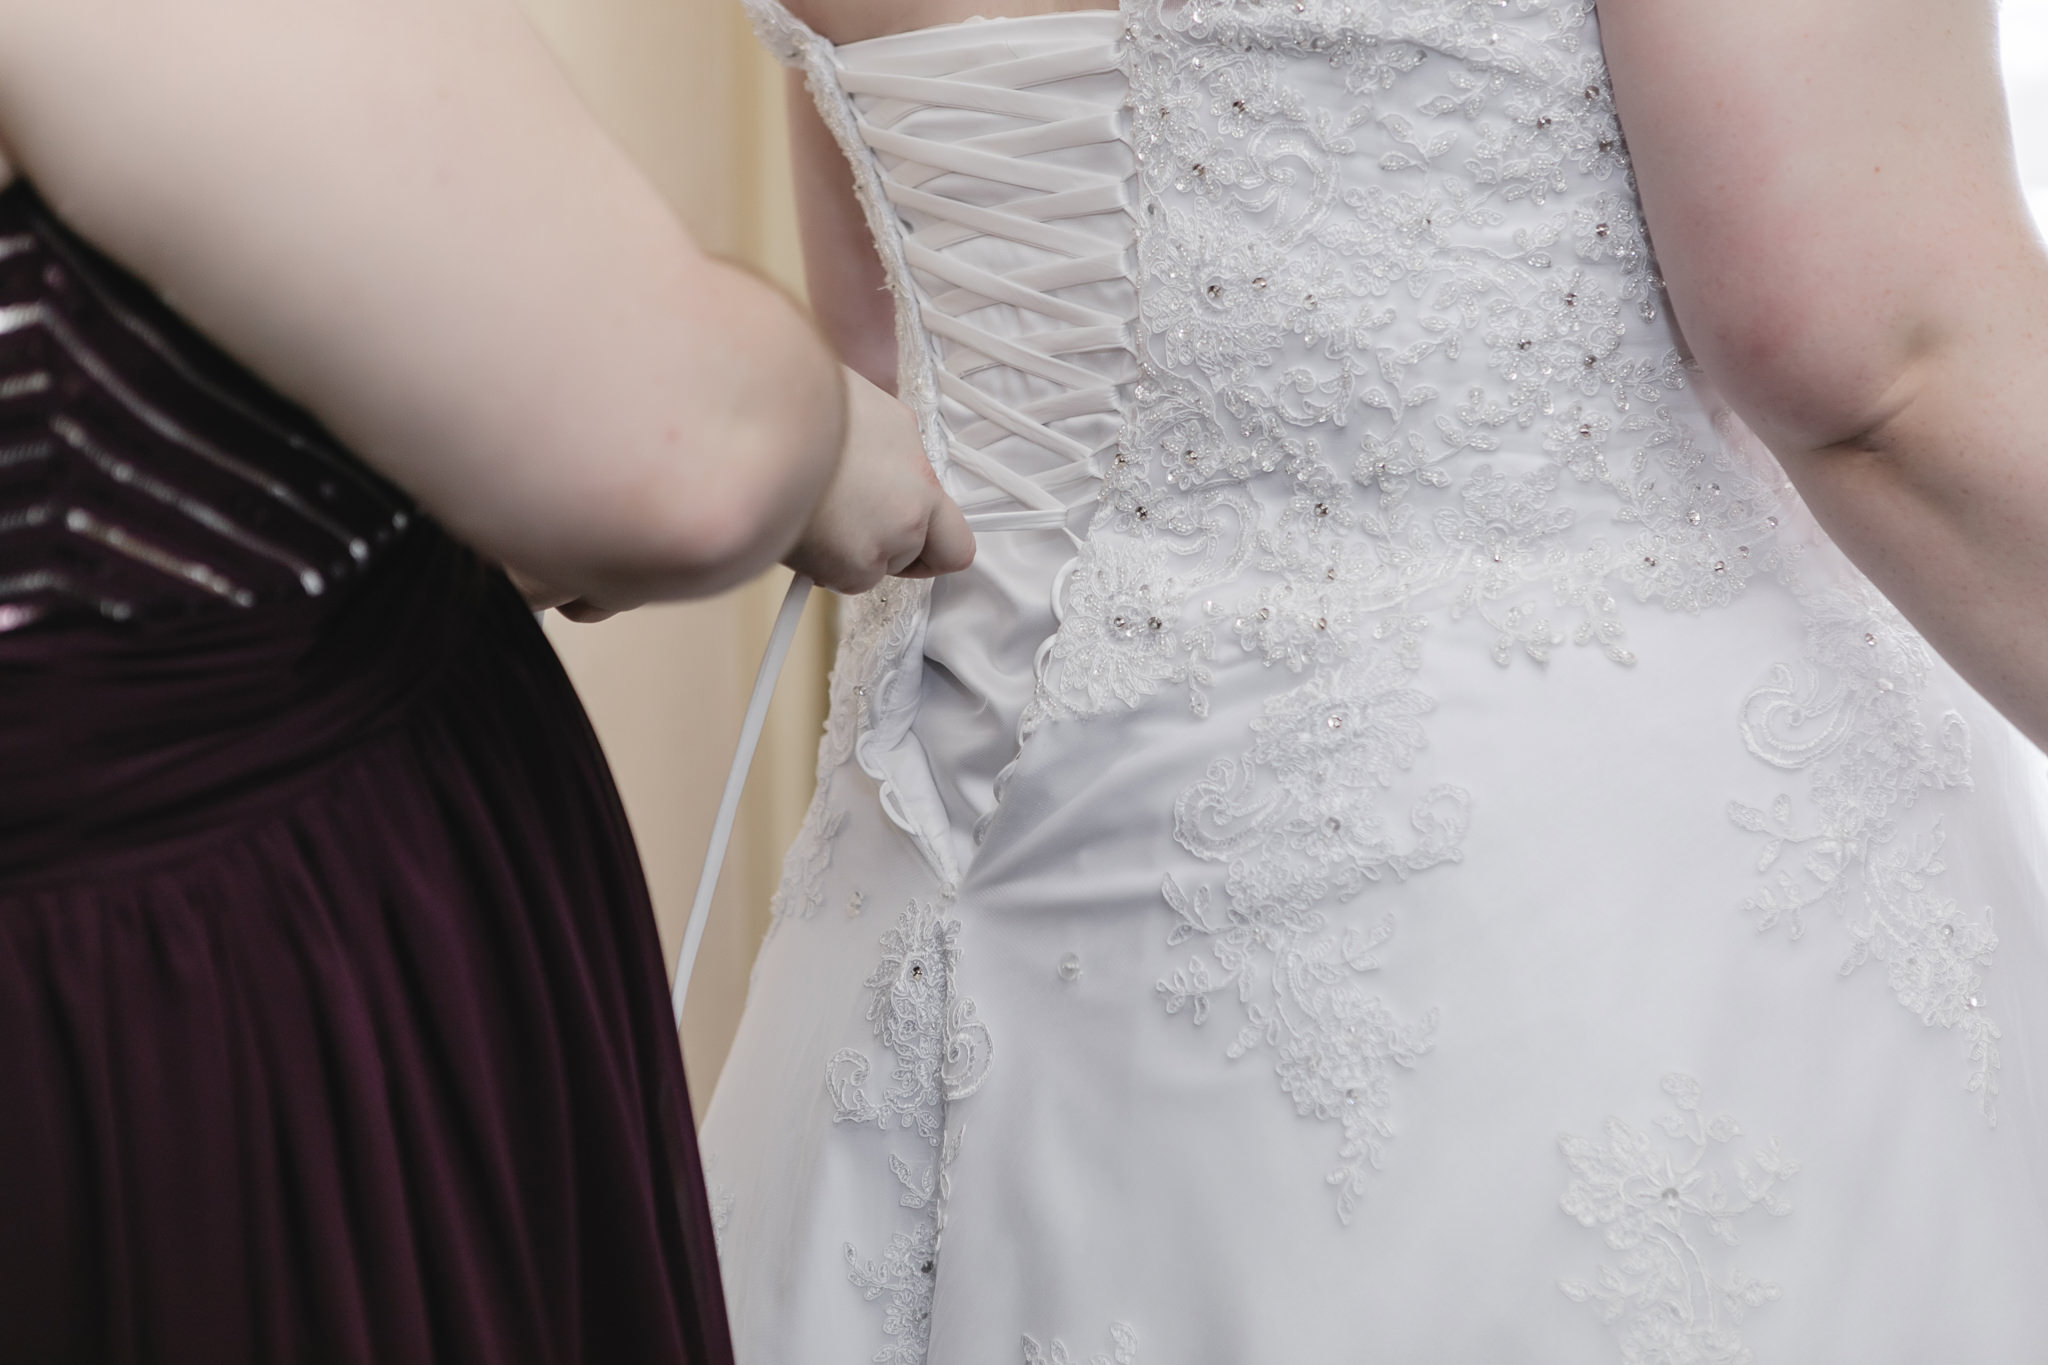 Maid of honor laces up bride's corset back wedding dress